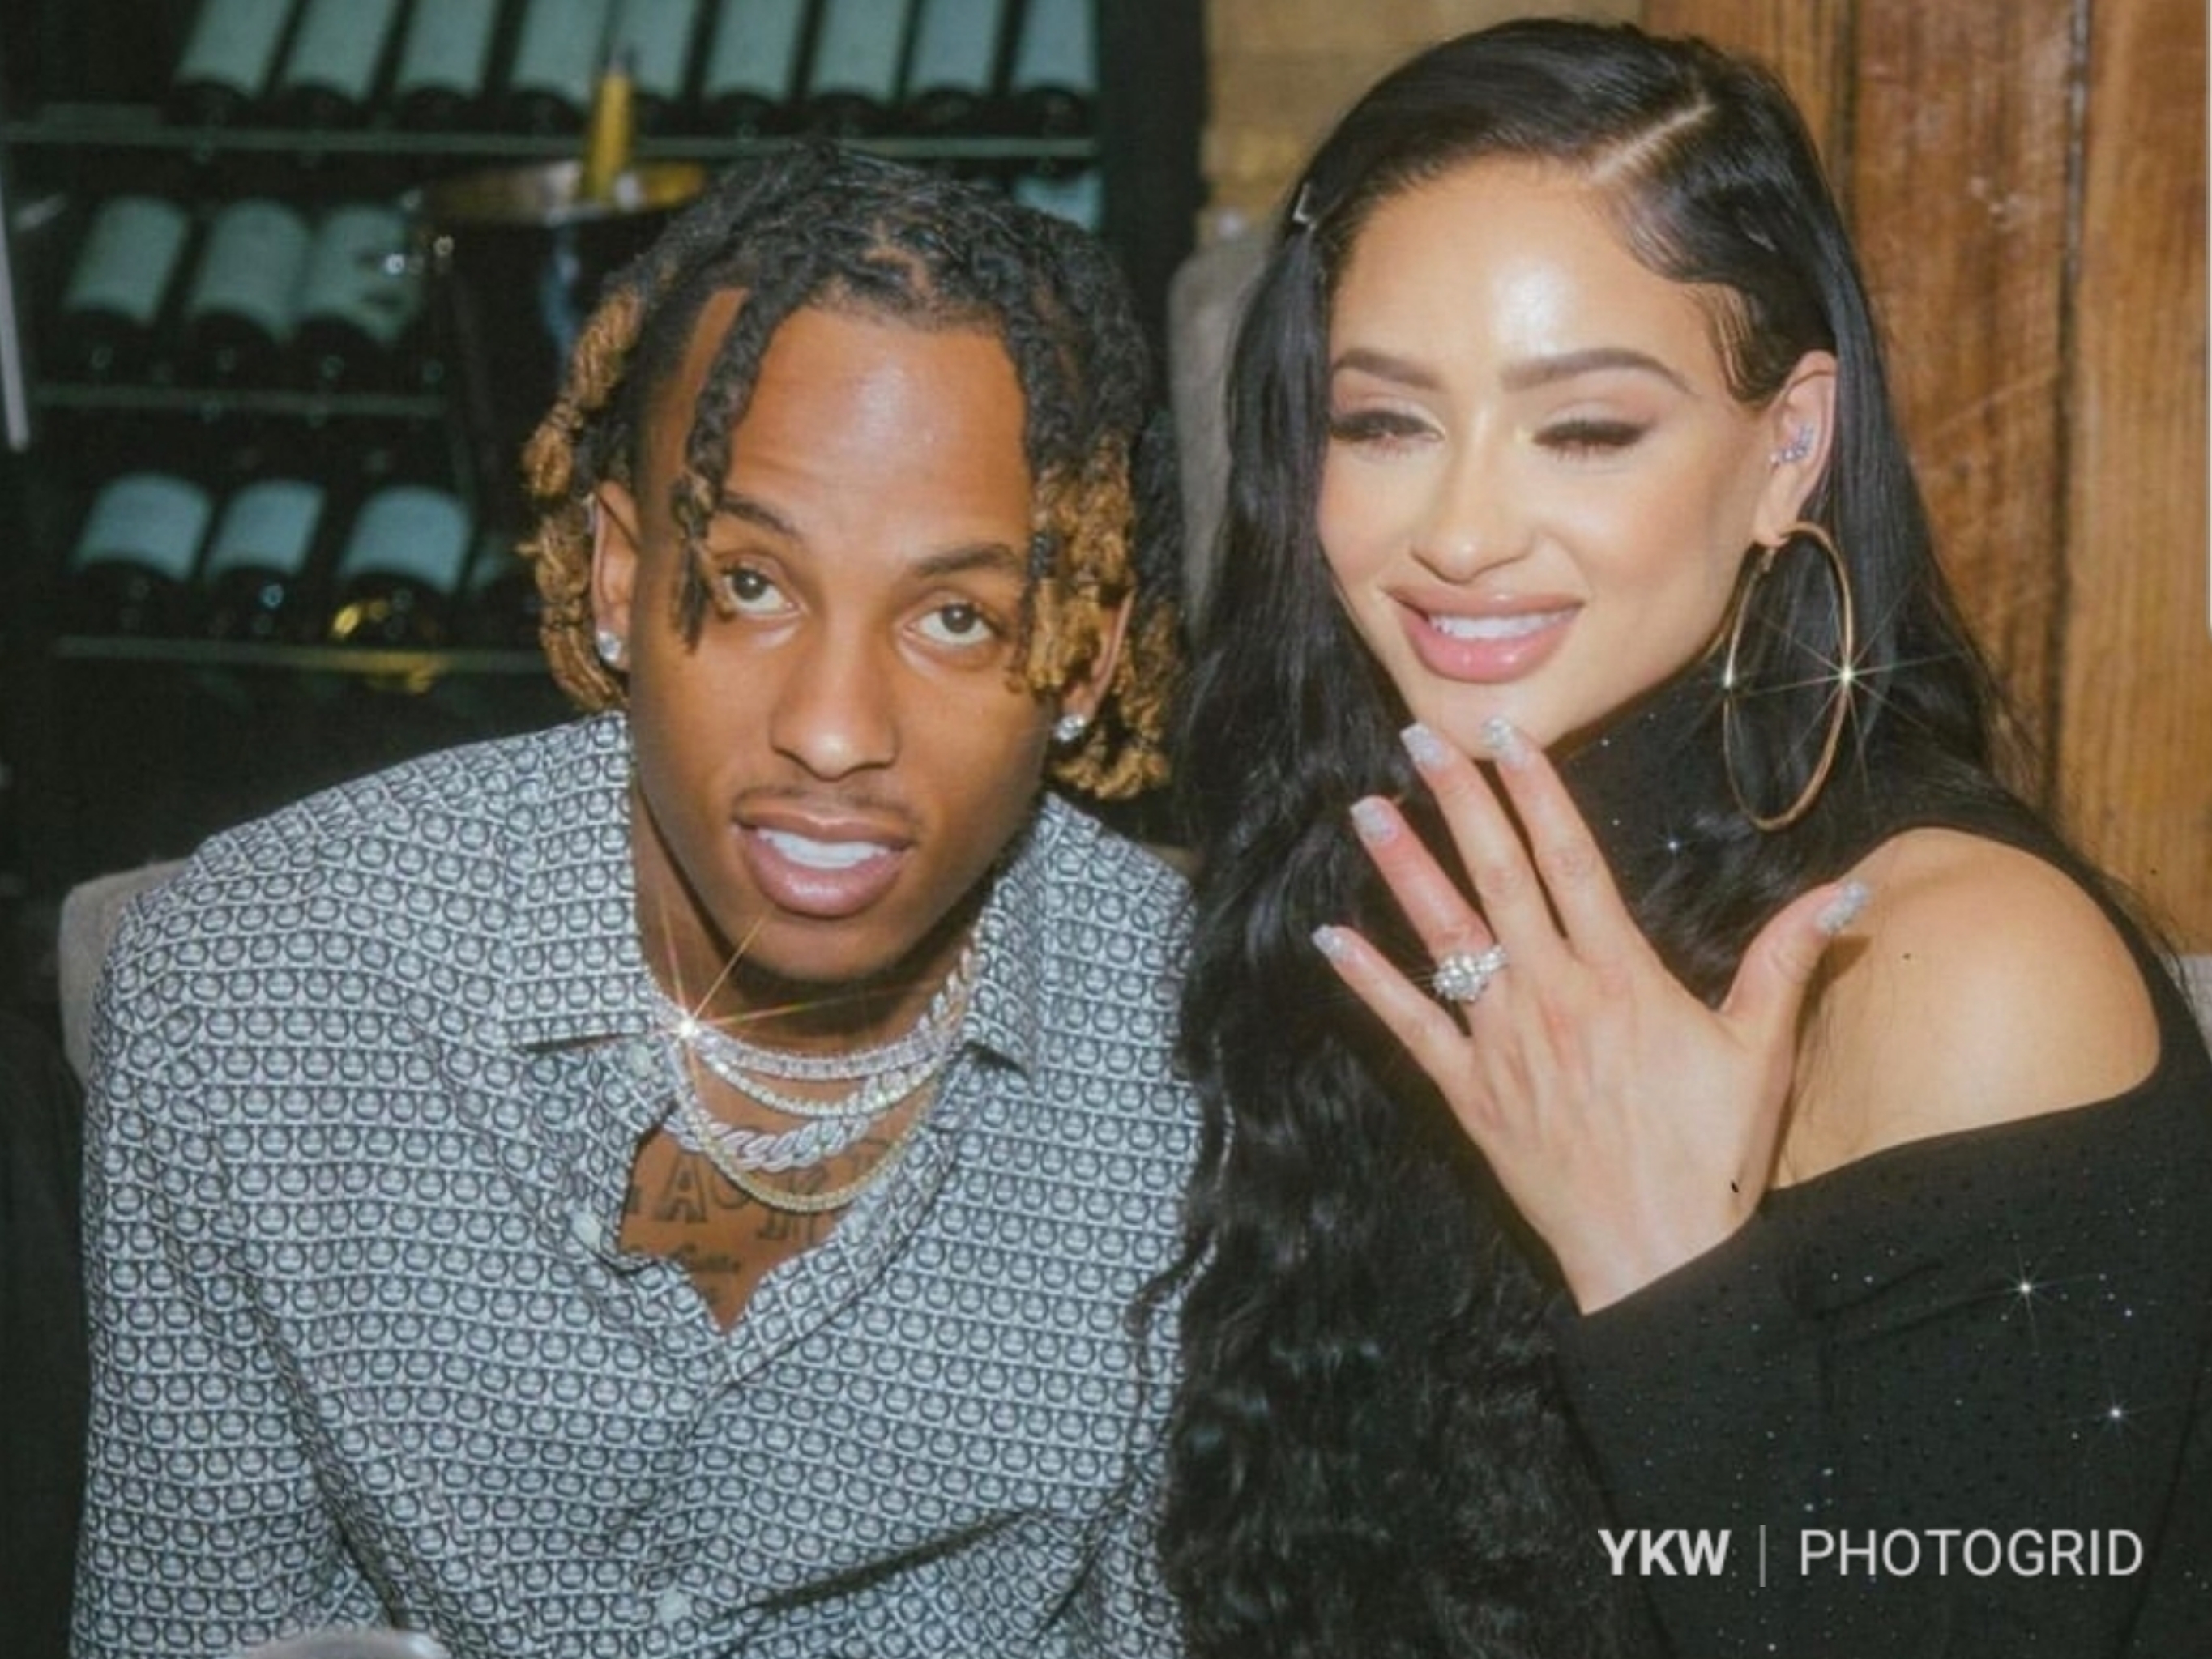 Rapper Rich The Kid And Girlfriend Tori Brixx Are Engaged!